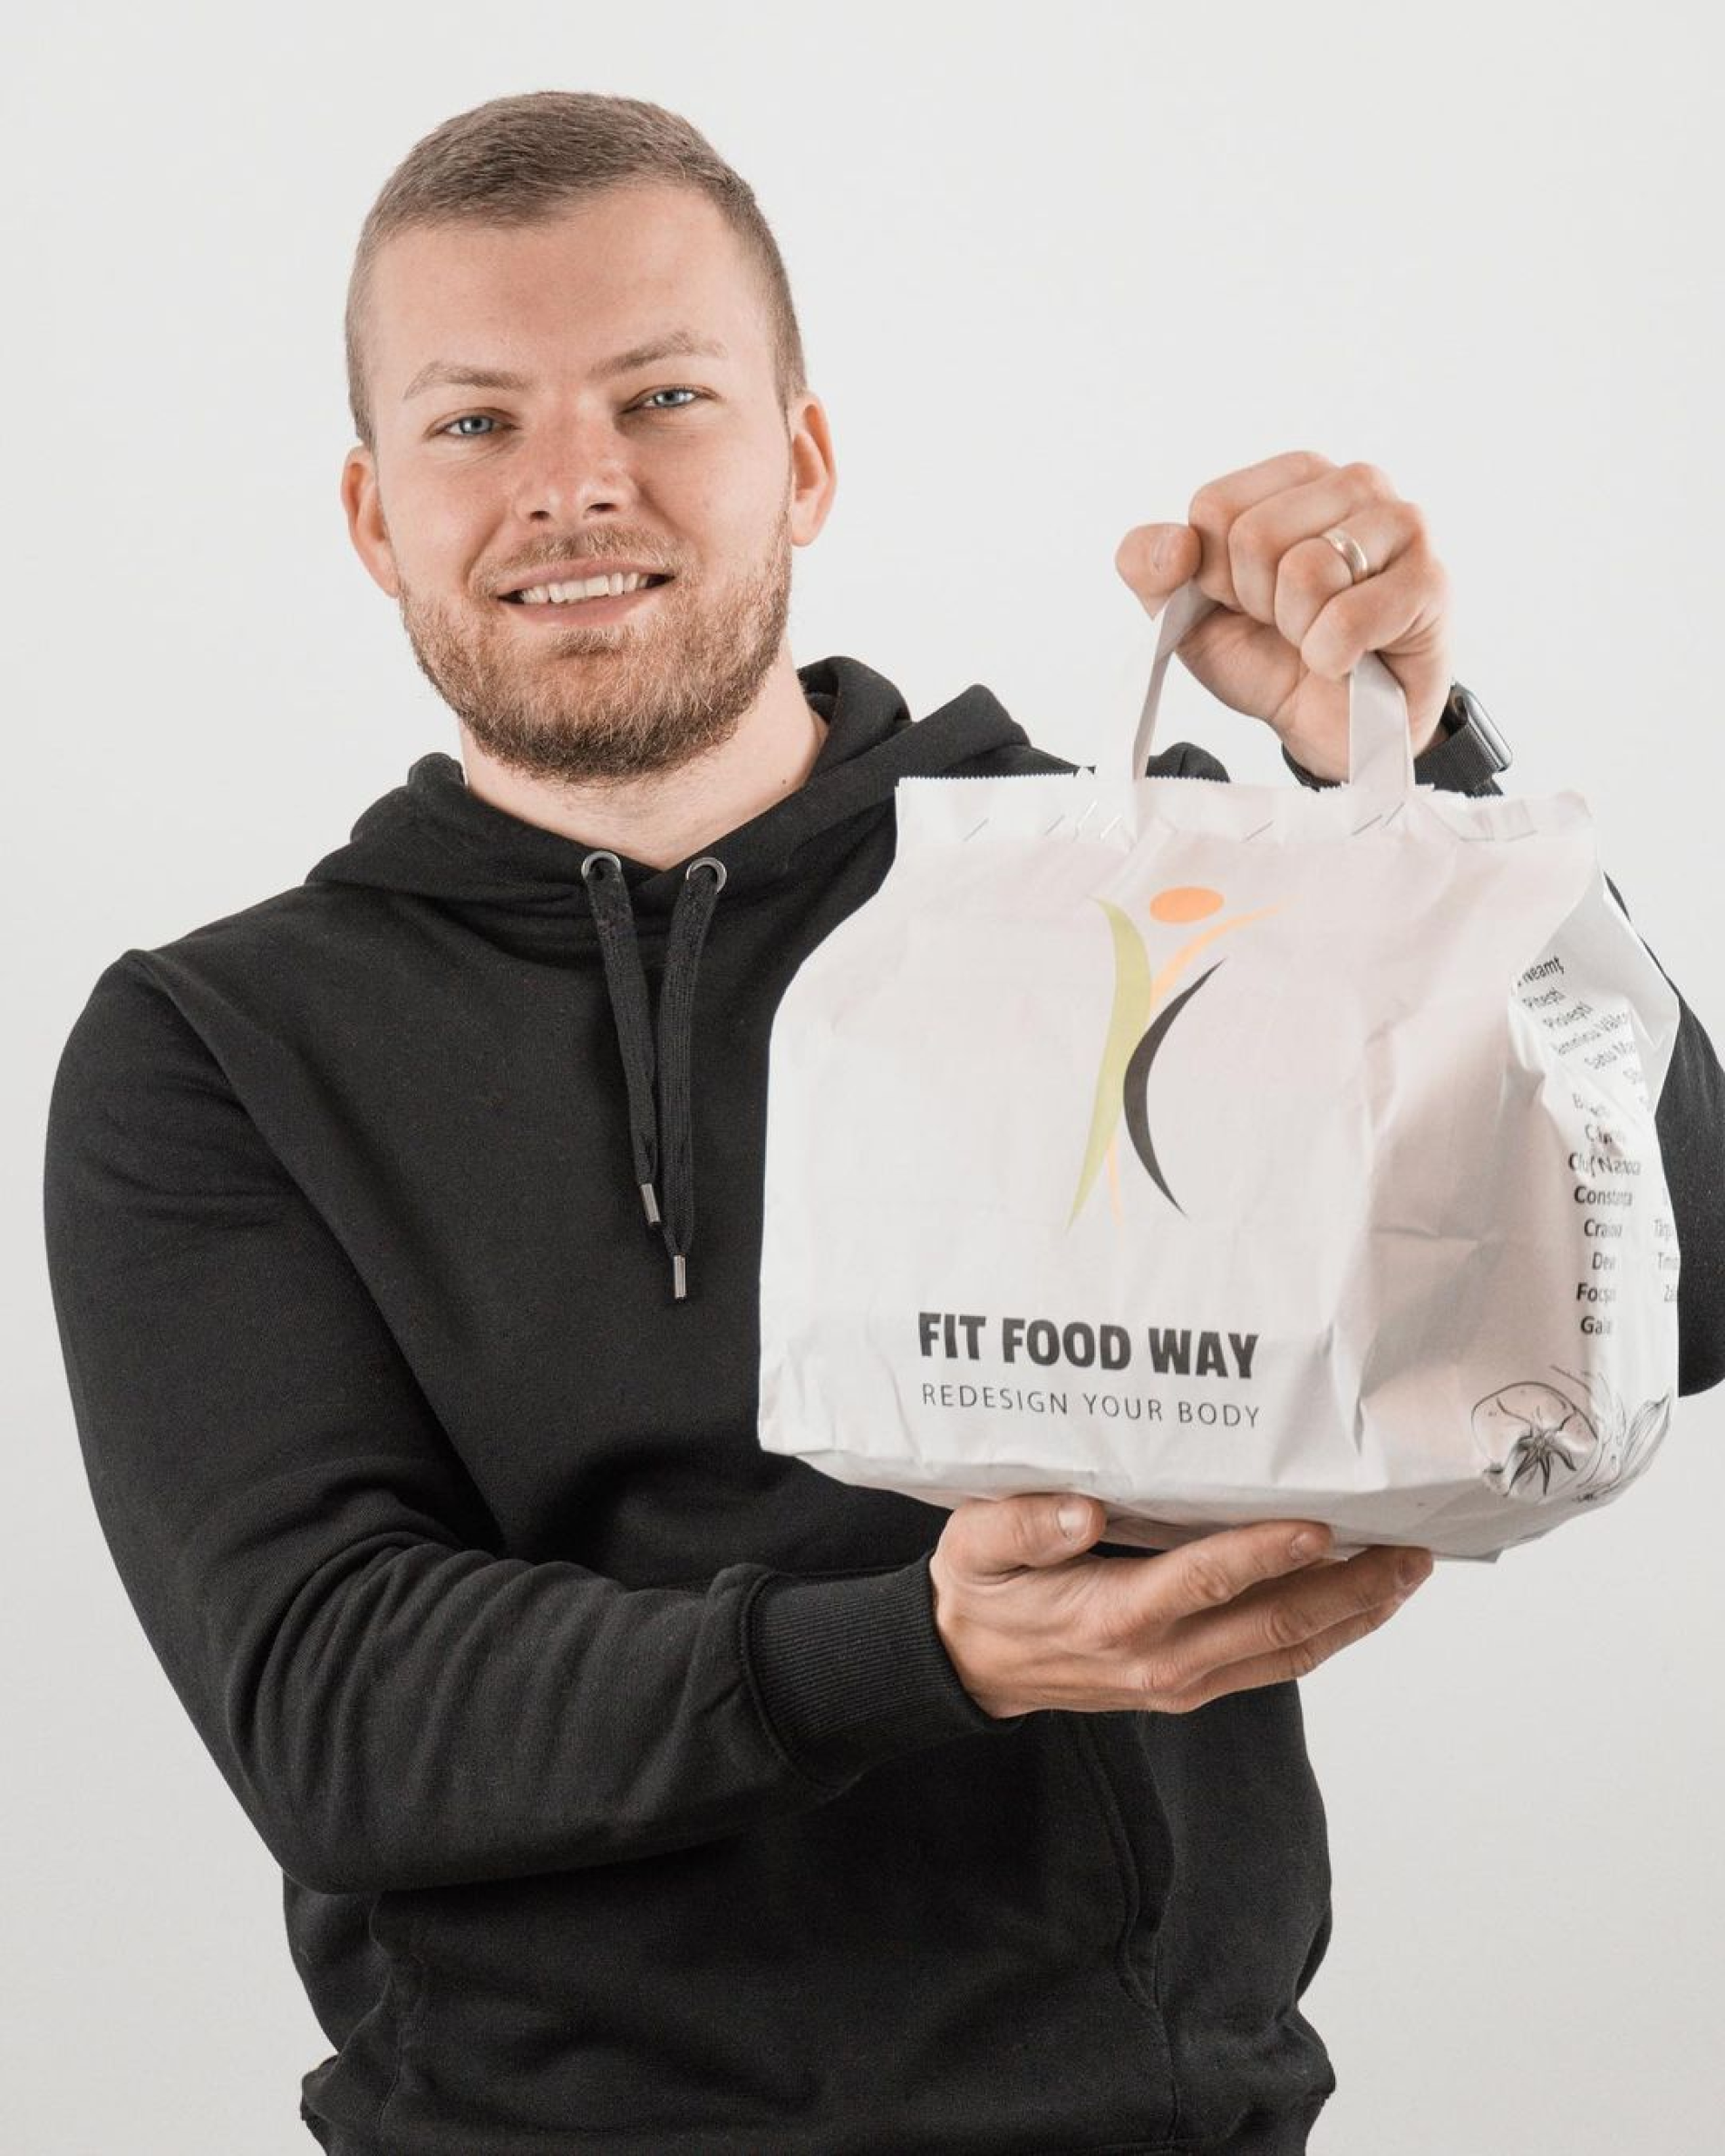 Benjamin Taylor - FitFoodWay has been the answer to my busy lifestyle!